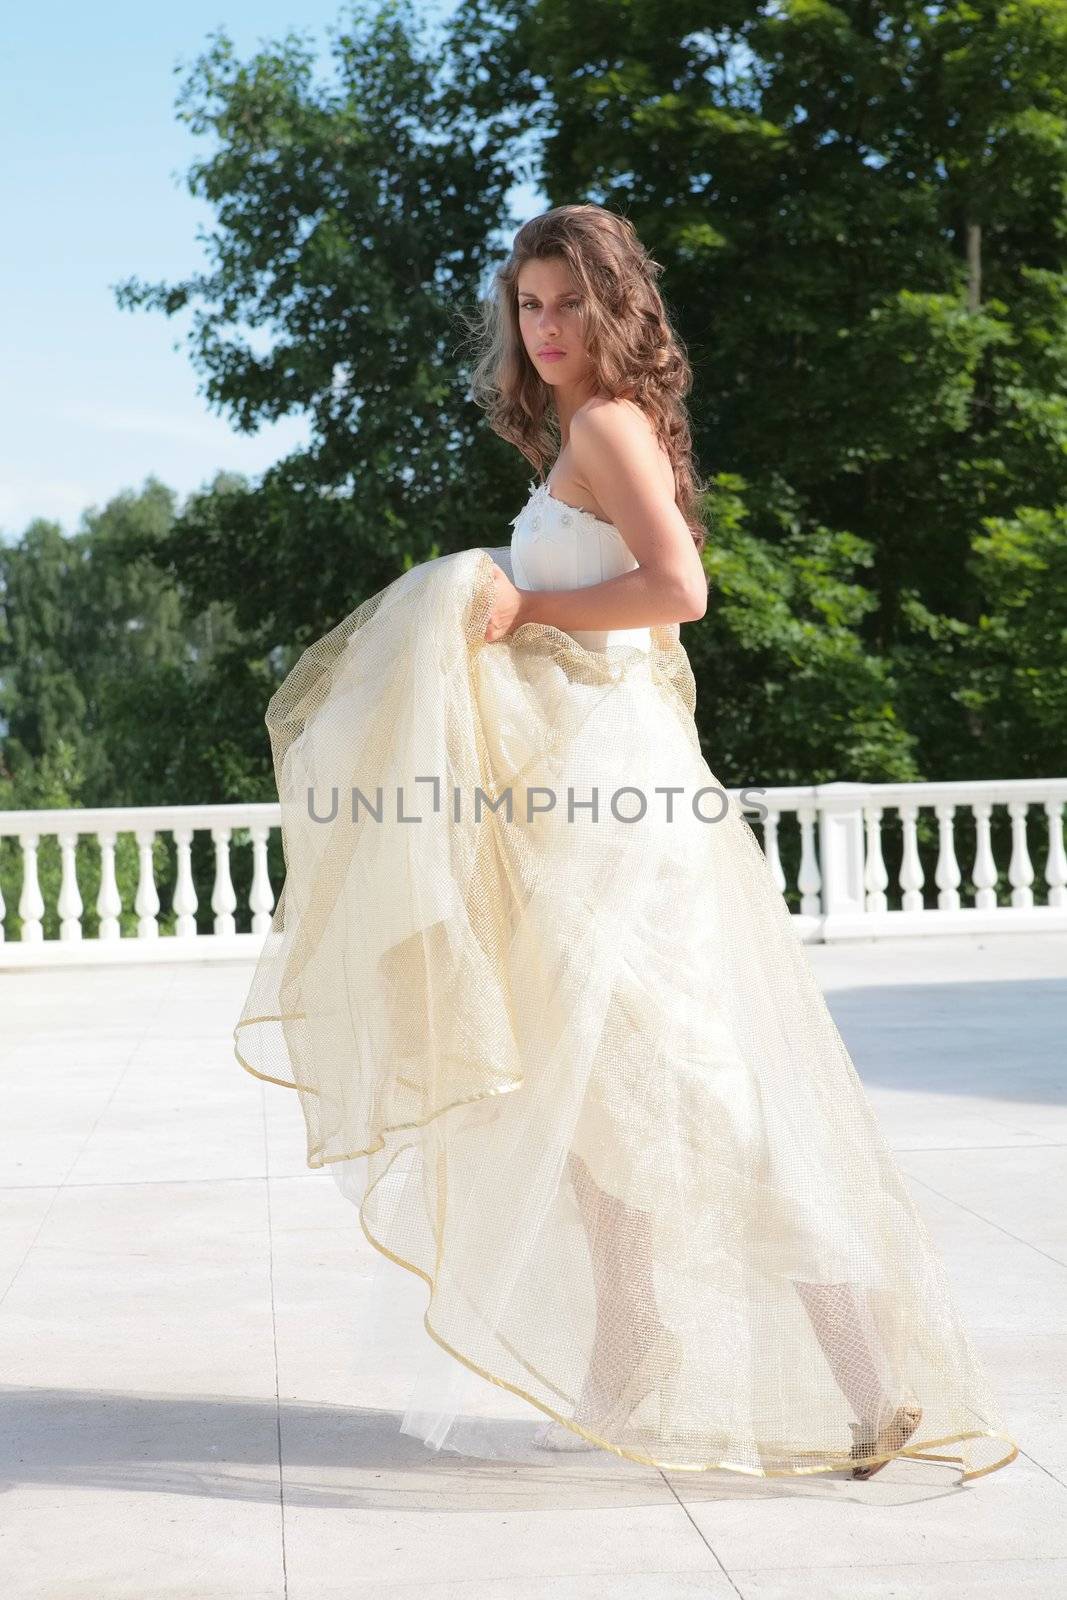 beautiful girl in wedding gown on background of the snow-white banisters